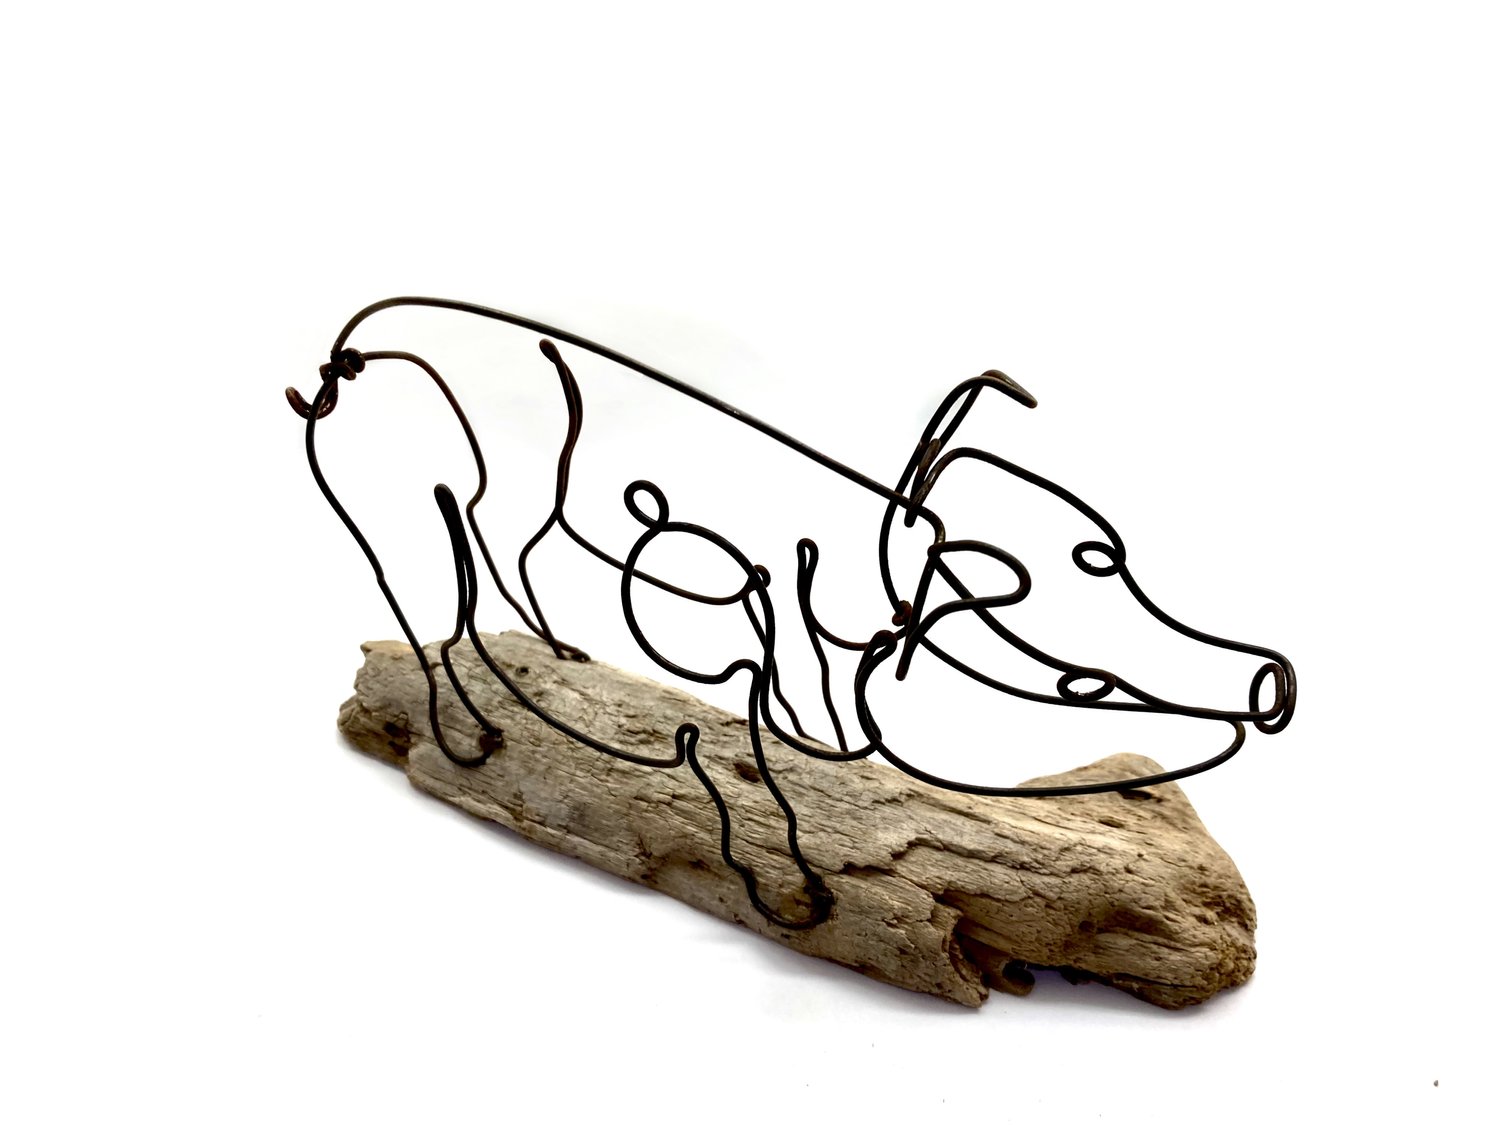 Pig Wire Sculpture, Pig Wire Art, Farm Animal Art, One Continuous Line  Sculpture — Wired by Bud